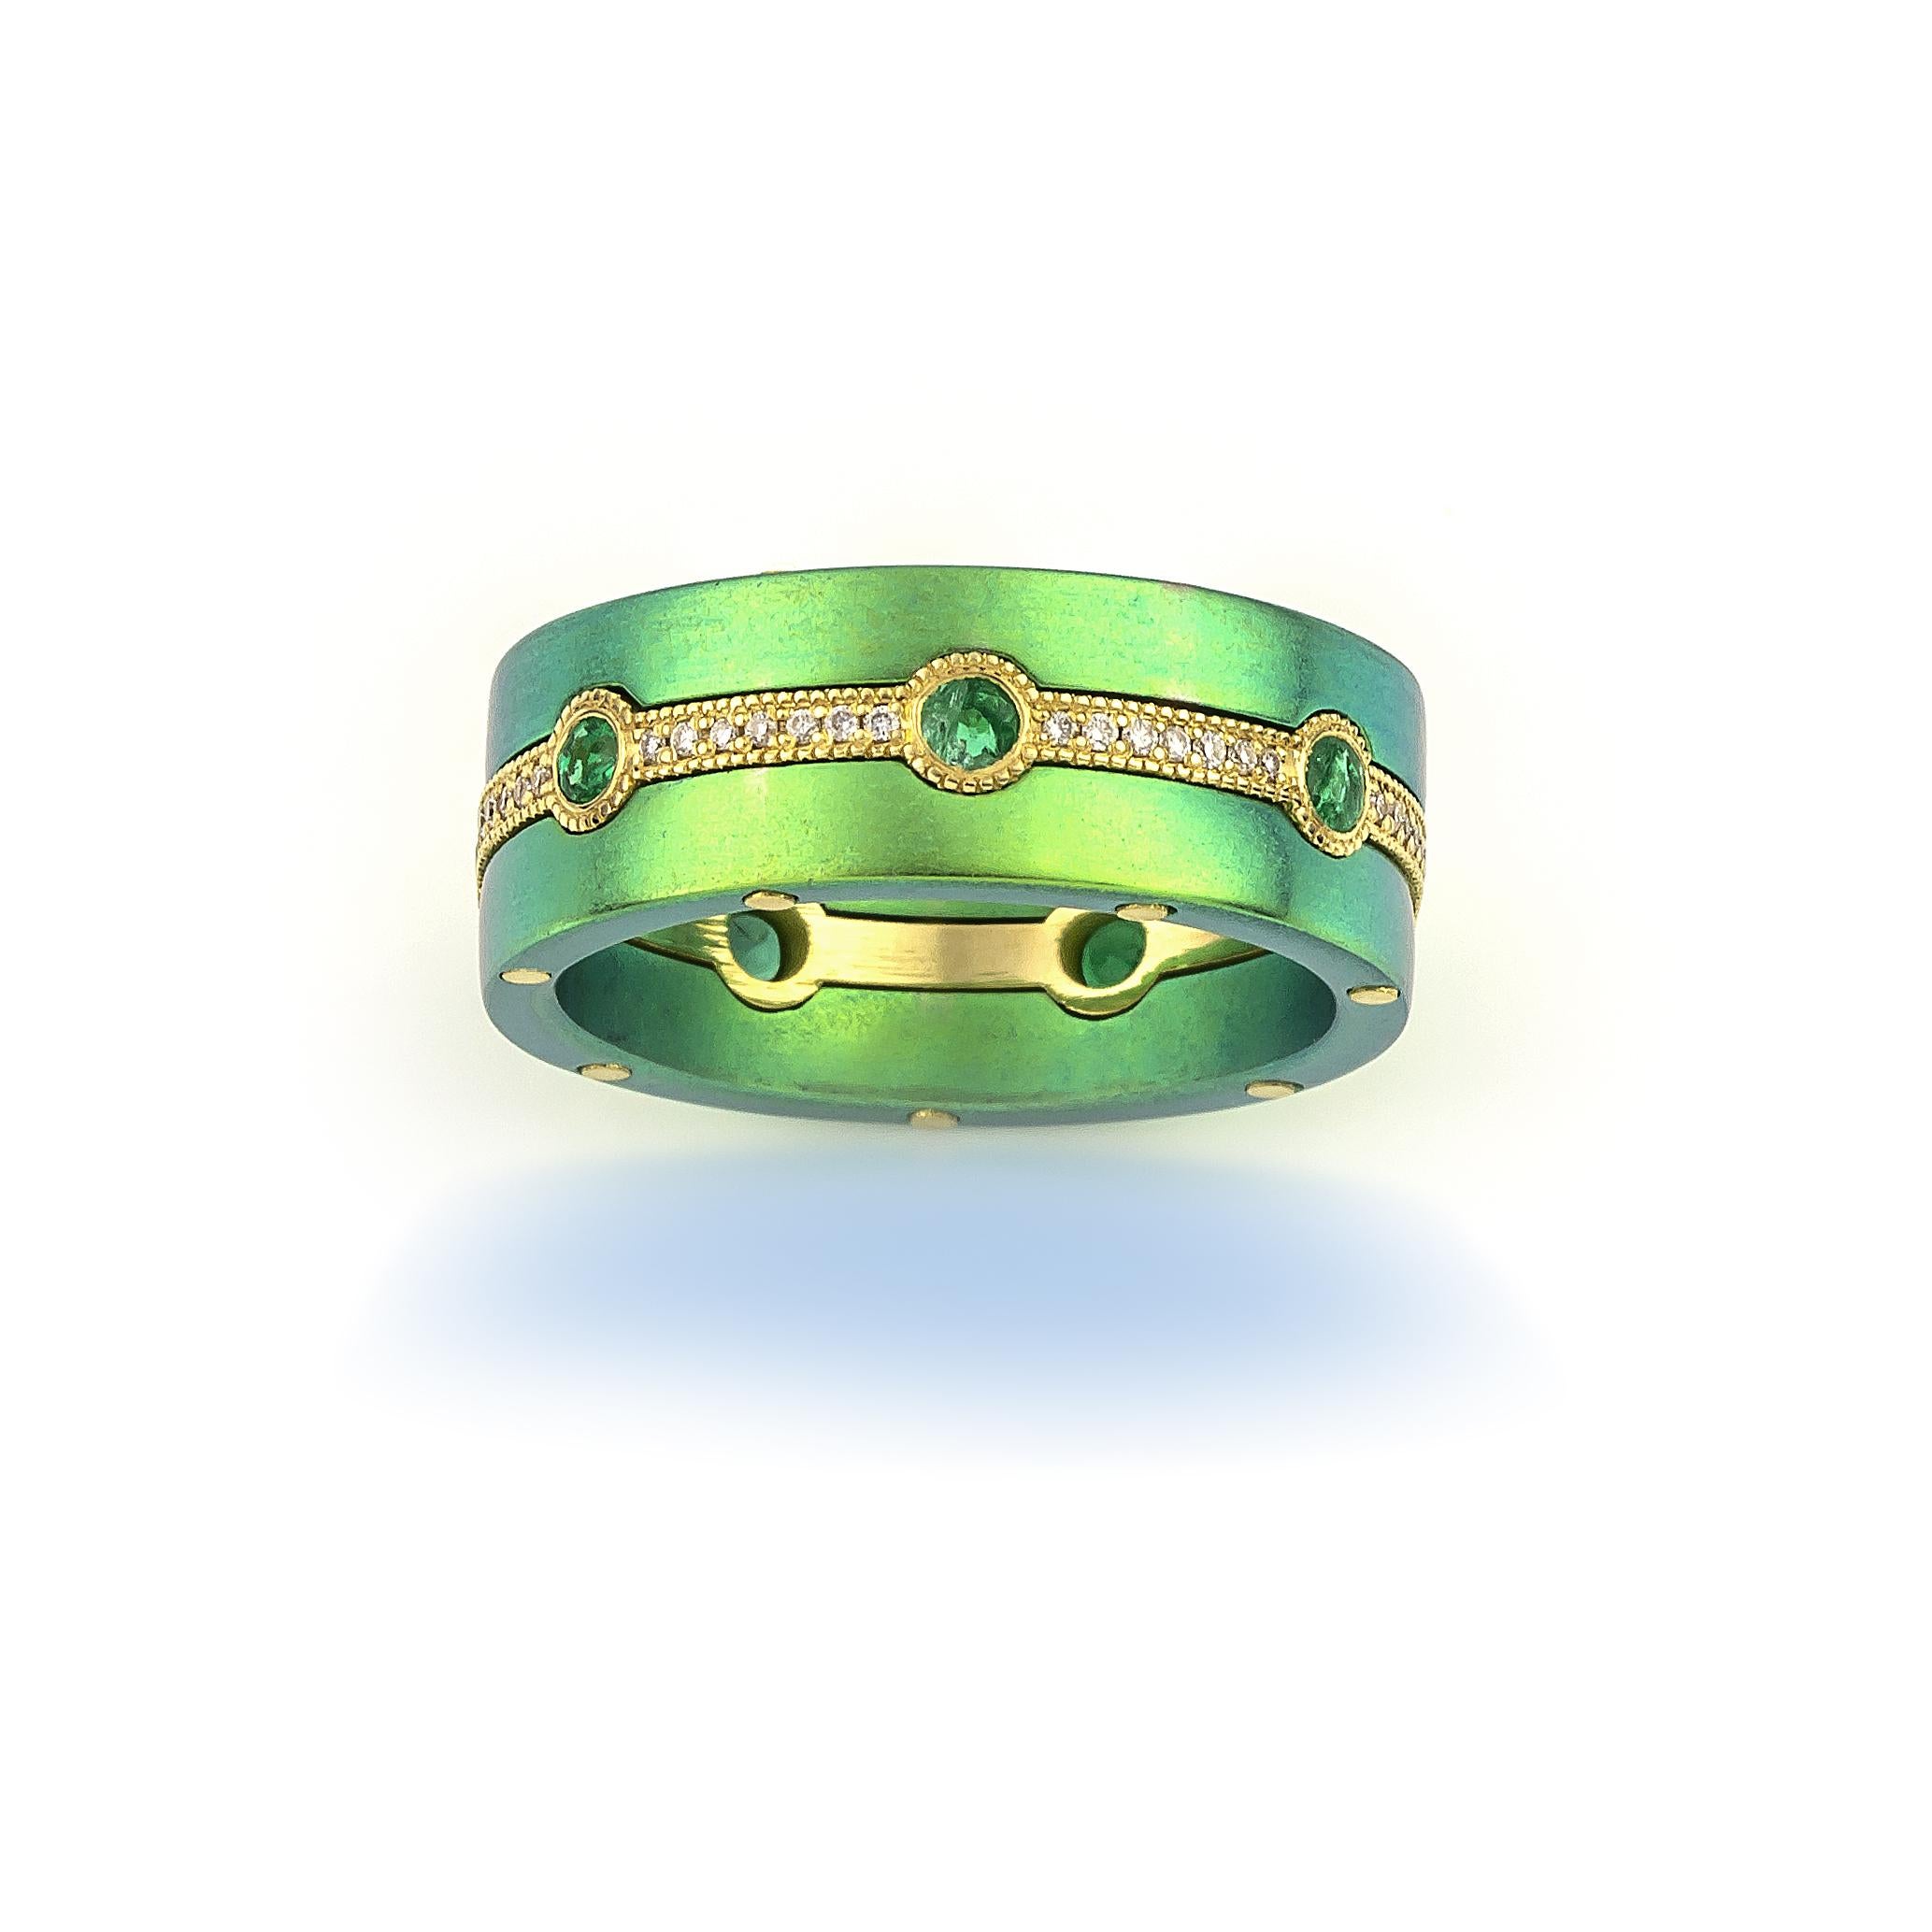 Emerald Titanium Band Ring by Vasilis Giampouras at Second Petale Gallery
This exquisite piece seamlessly blends luxury materials and timeless design, making it a true treasure to behold. Crafted from premium titanium in a captivating green hue,